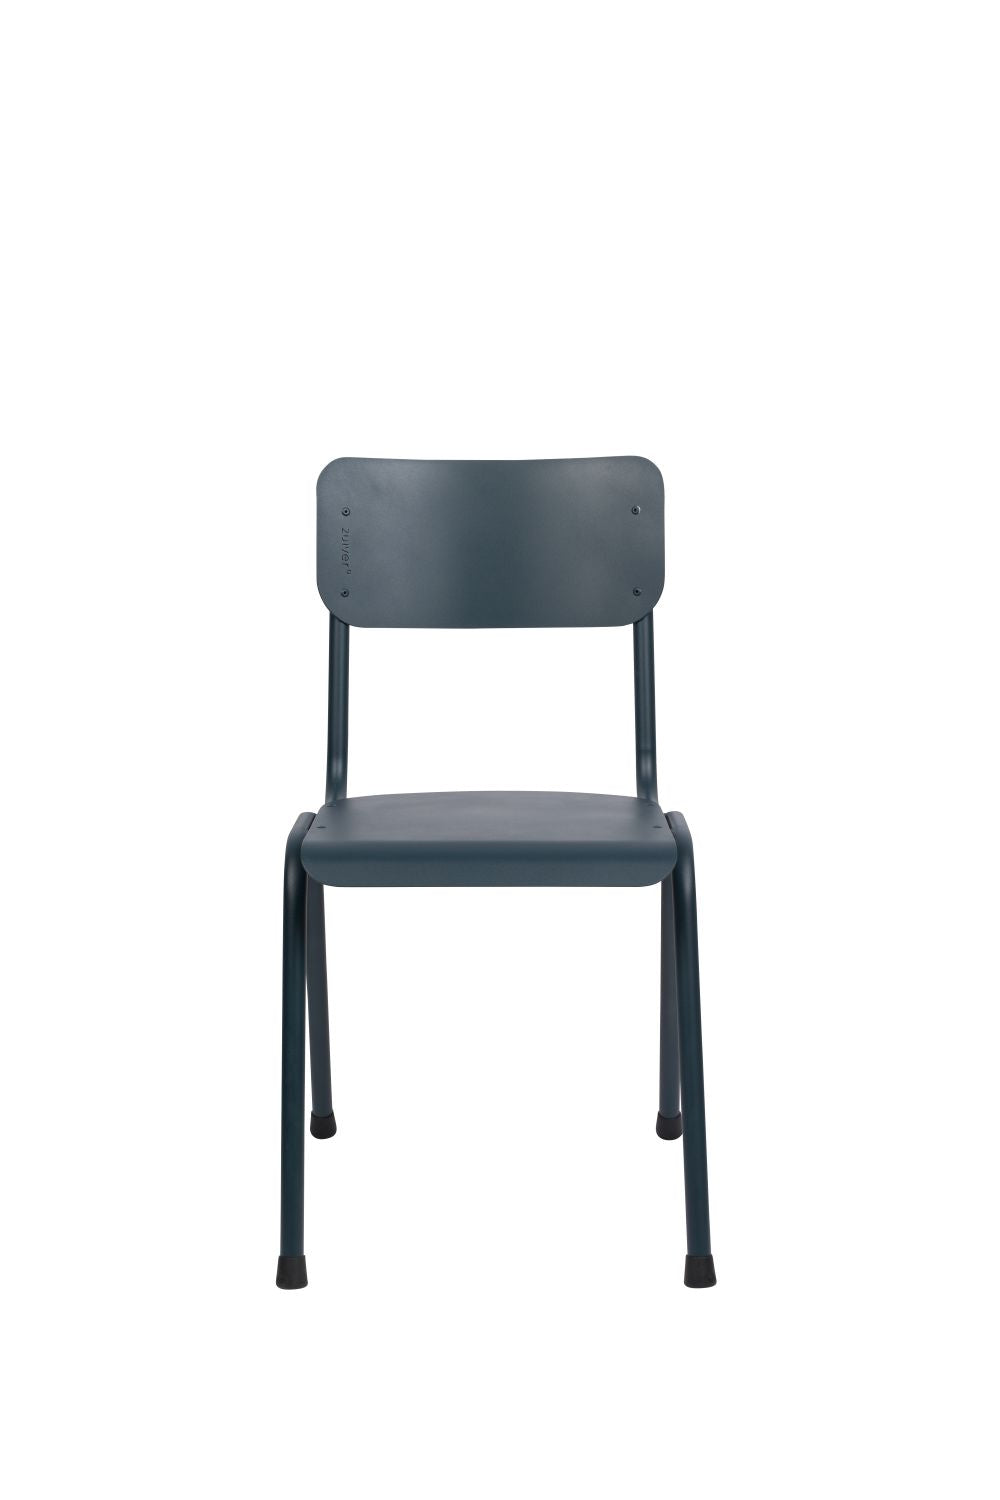 Zuiver Set of 2 Outdoor Chairs Back To School Grey Blue